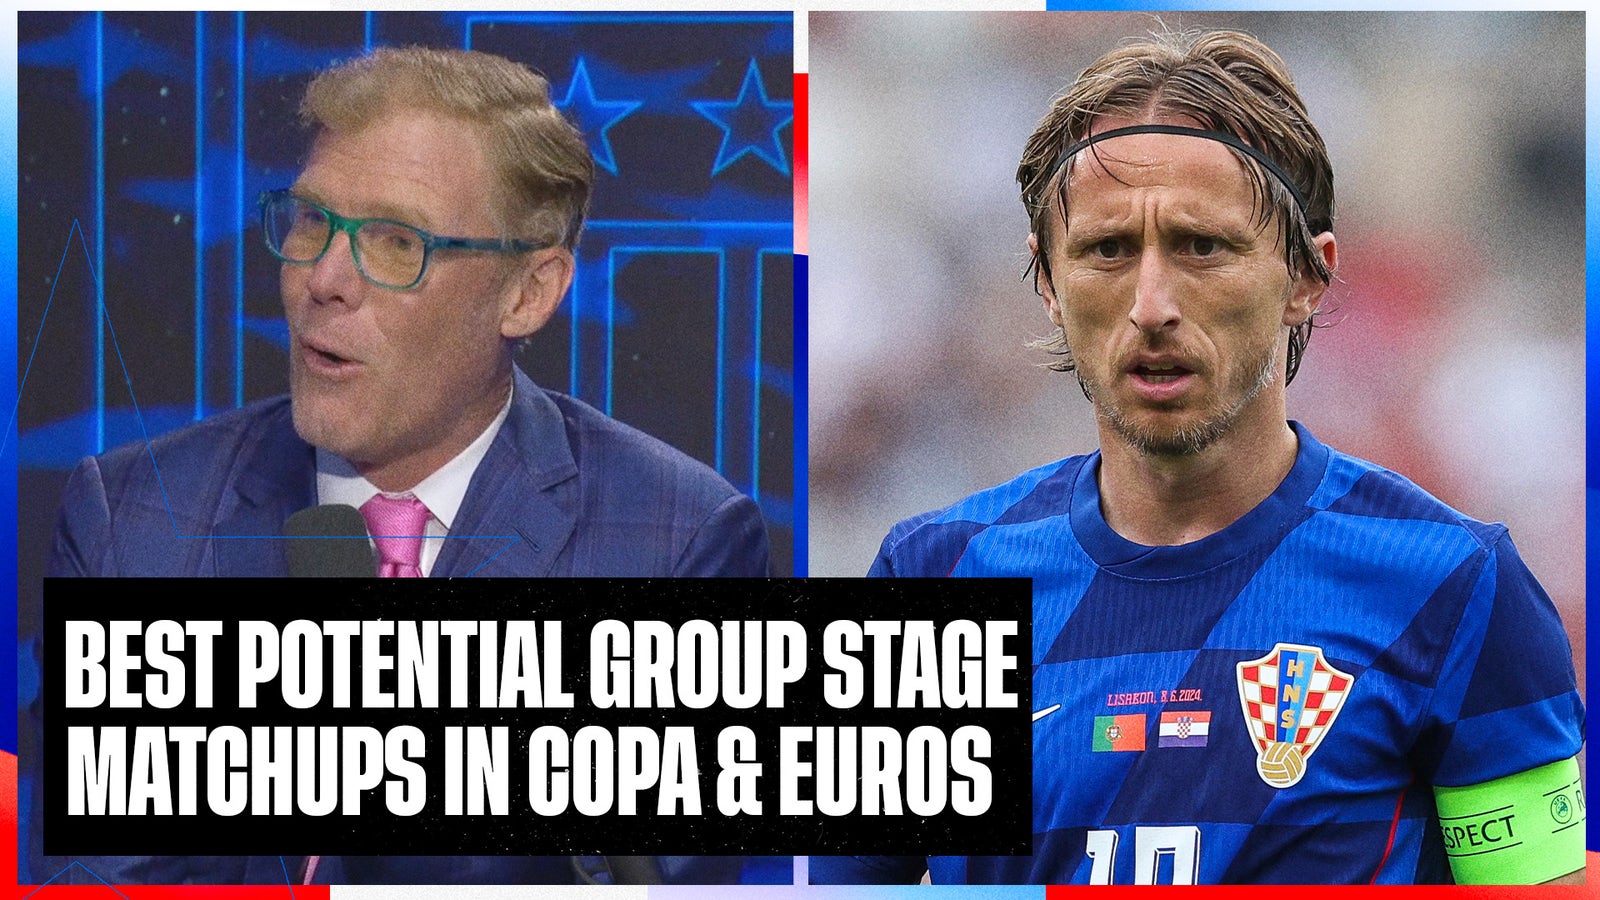 Preview of most exciting group stage matches in Euro & Copa 